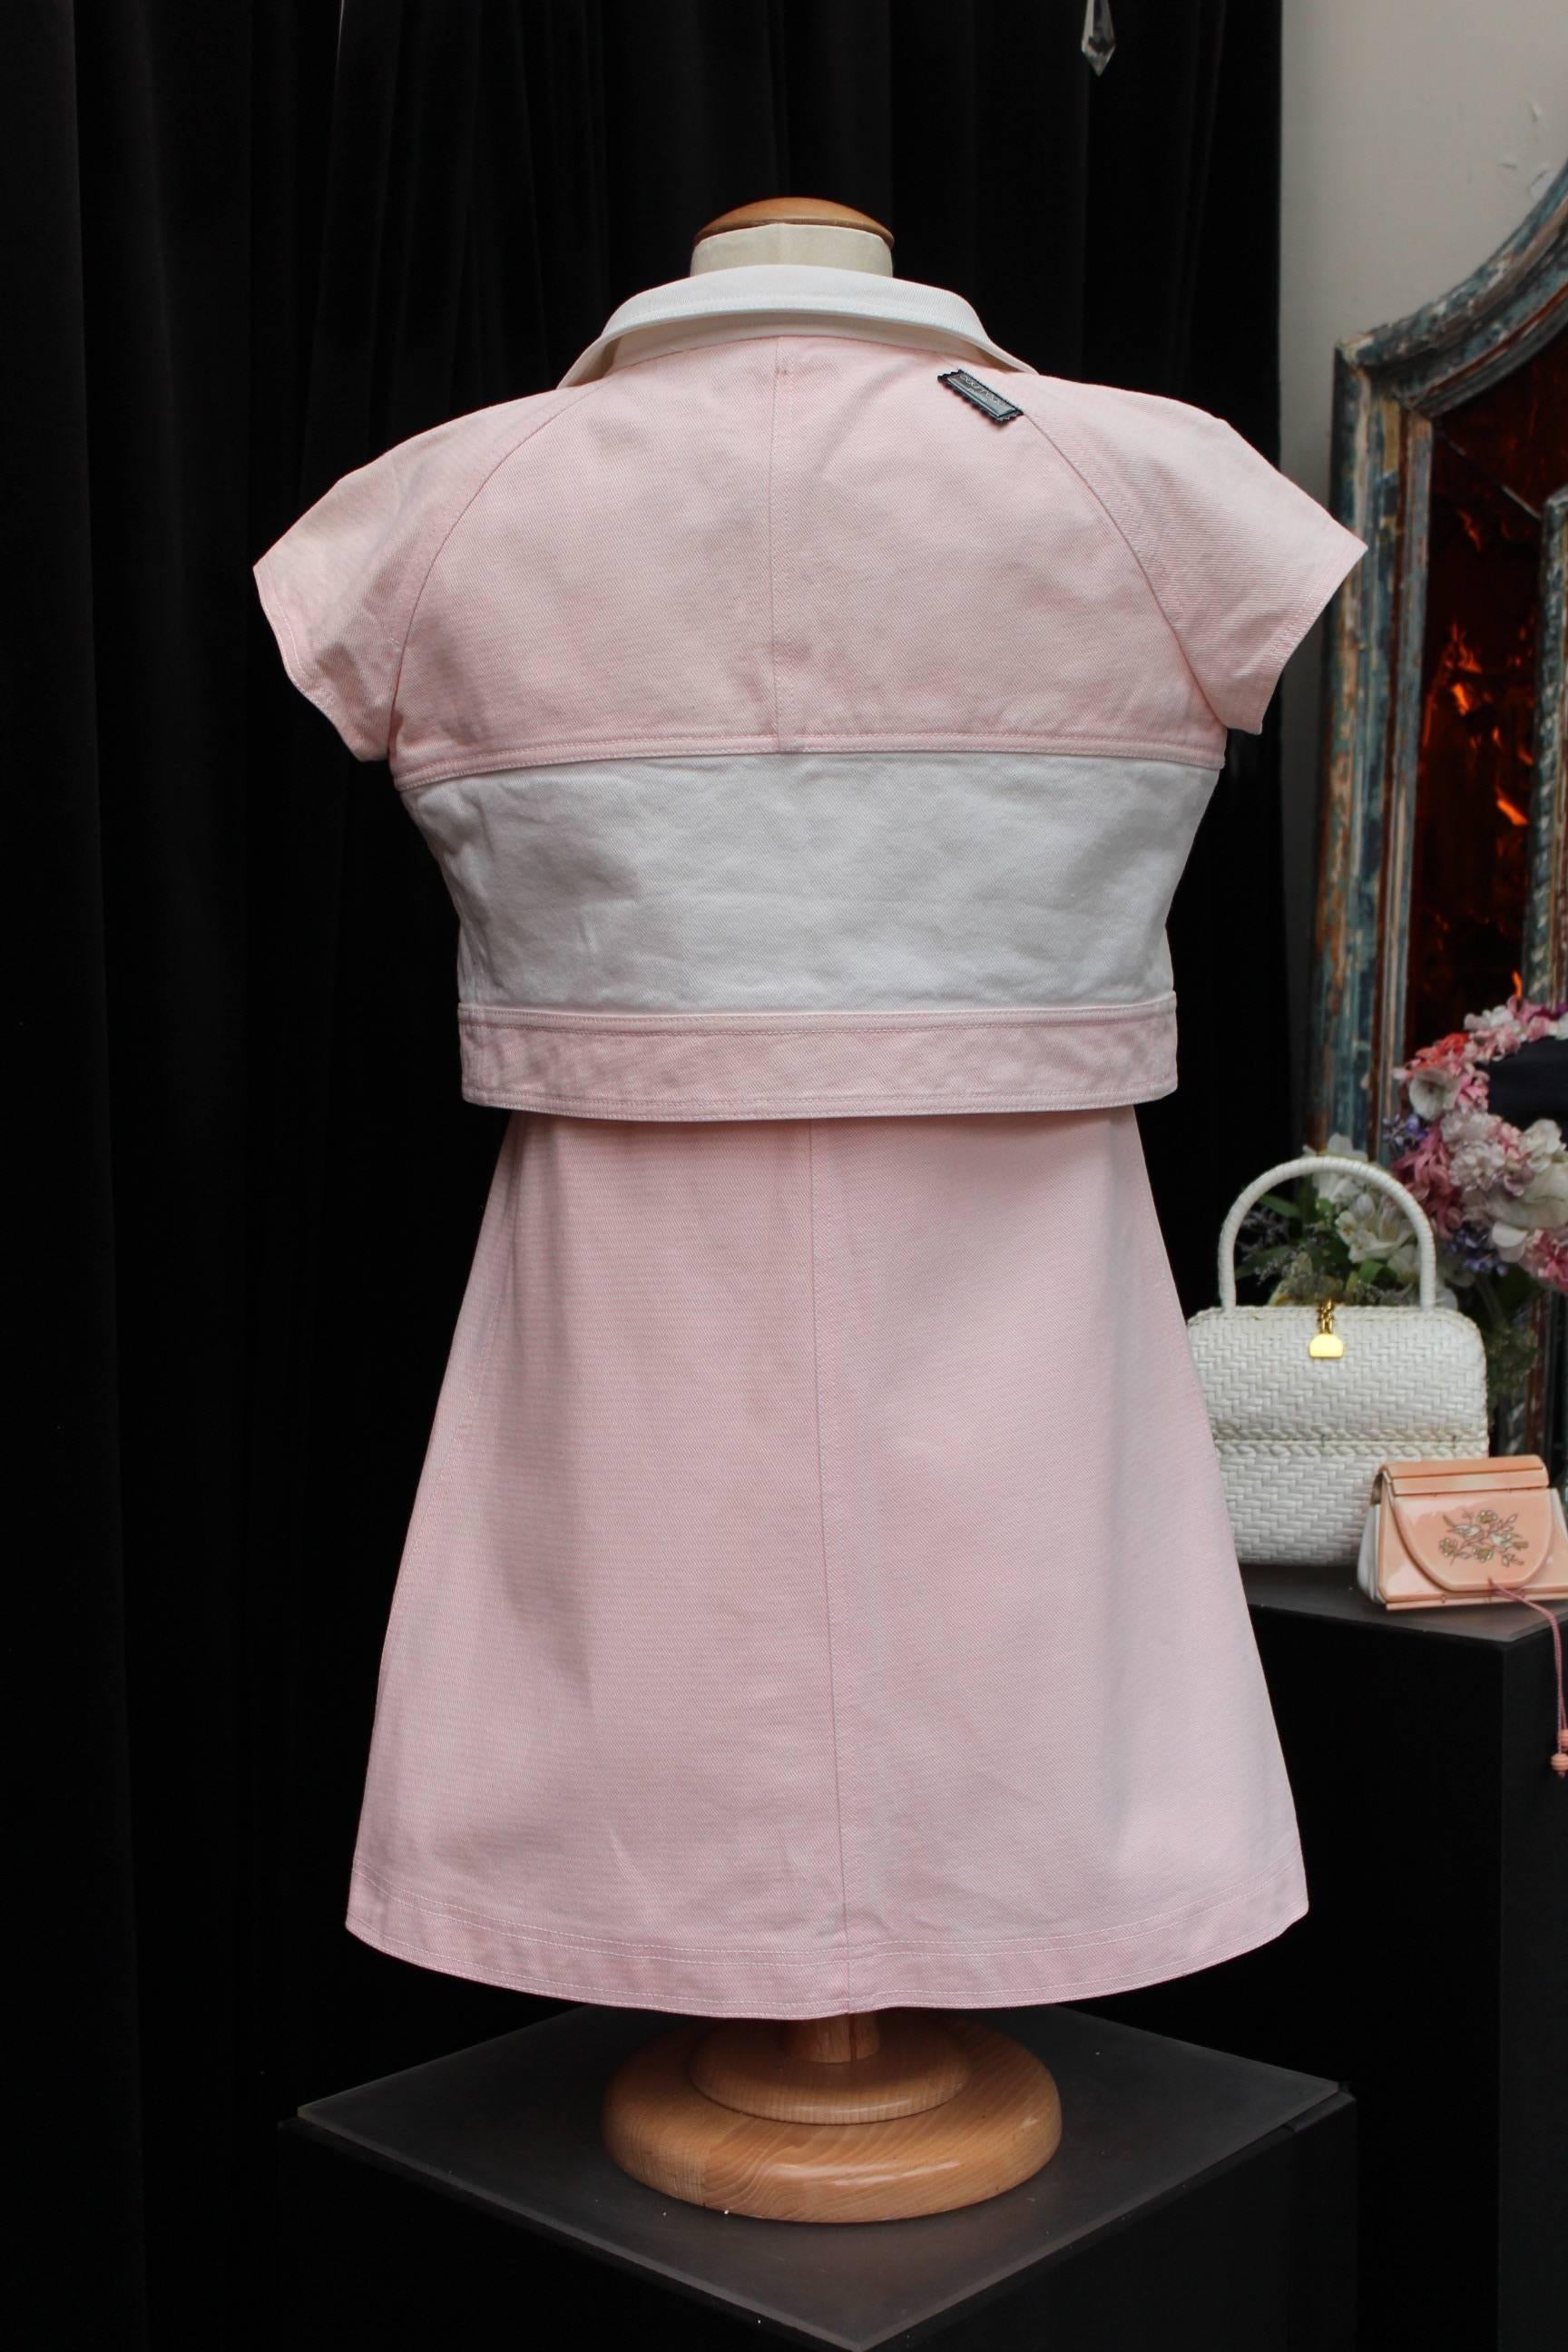 COURREGES (Made in France) Adorable set comprised of a three-hole dress and a short jacket with short sleeves. The set is made of white and light pink cotton. The flared dress with patch pockets is knee-high. It closes with a white zip on the left